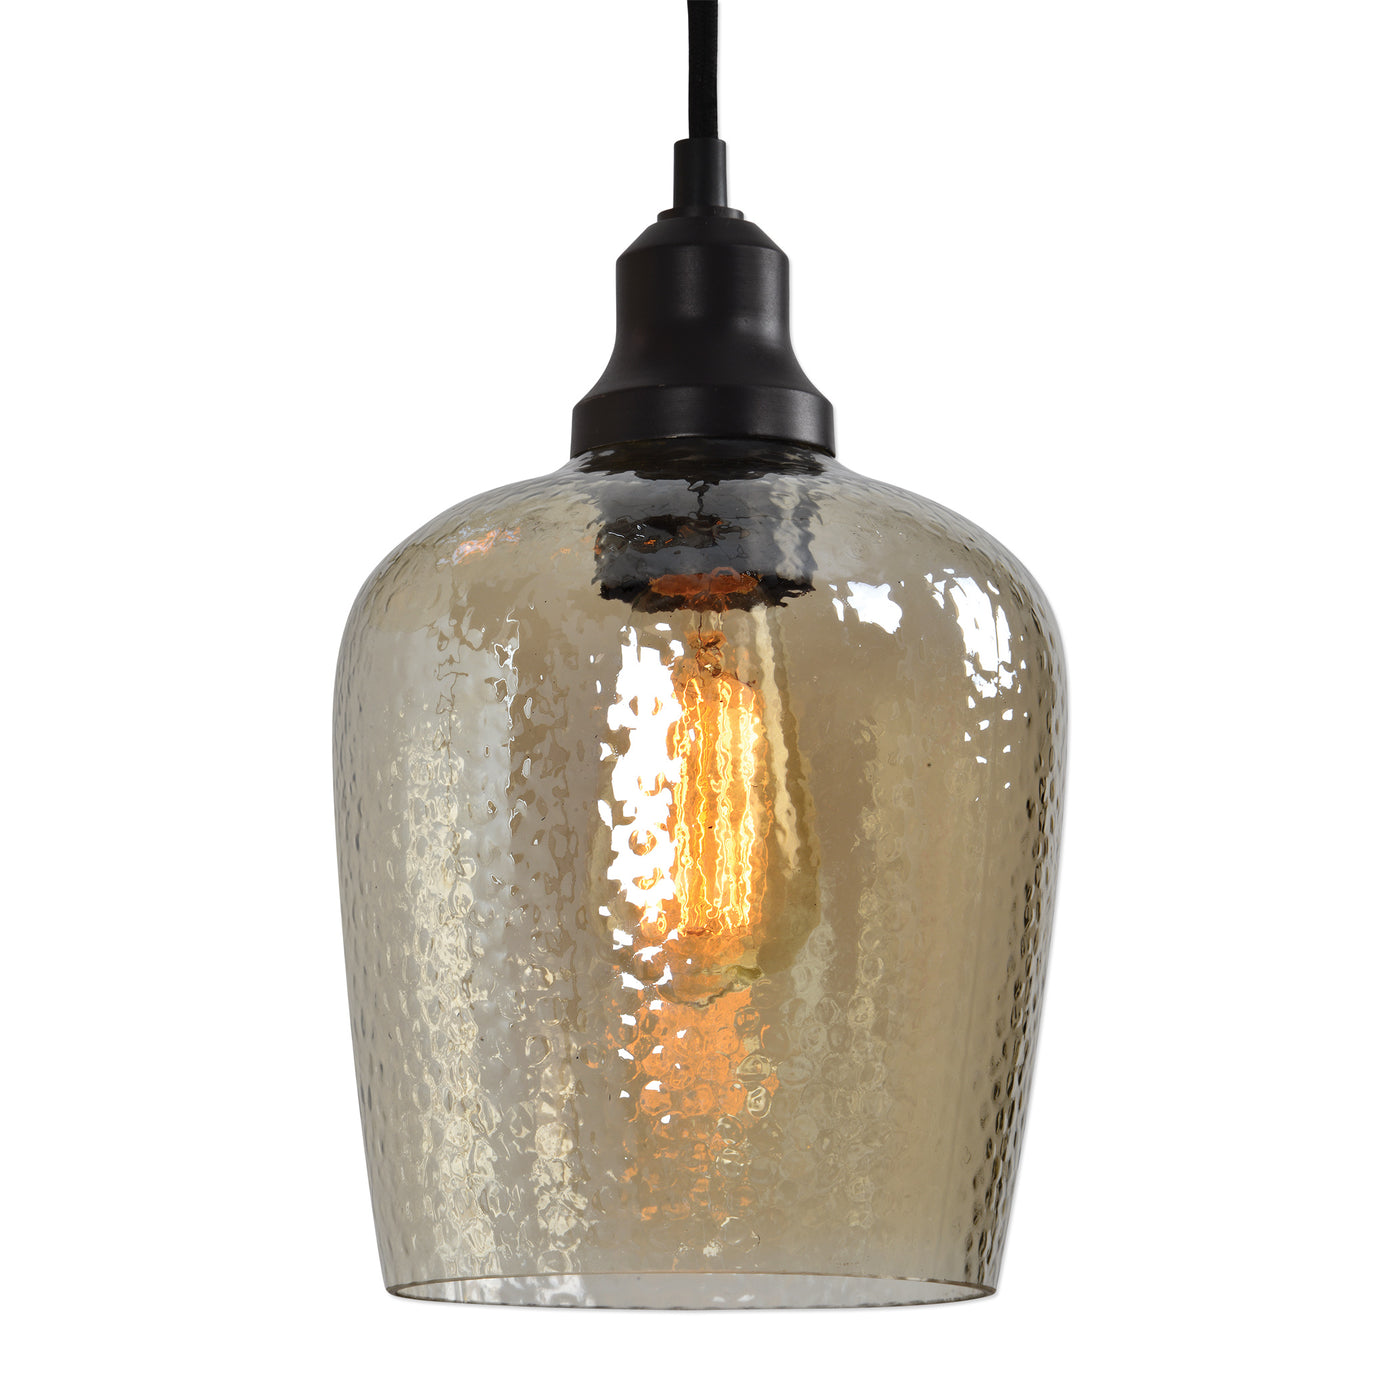 Rich Amber Hammered Glass Is The Focus Of This 5 Lt. Cluster Pendant Featuring A Warm Oil Rubbed Bronze Metal Finish.  Inc...